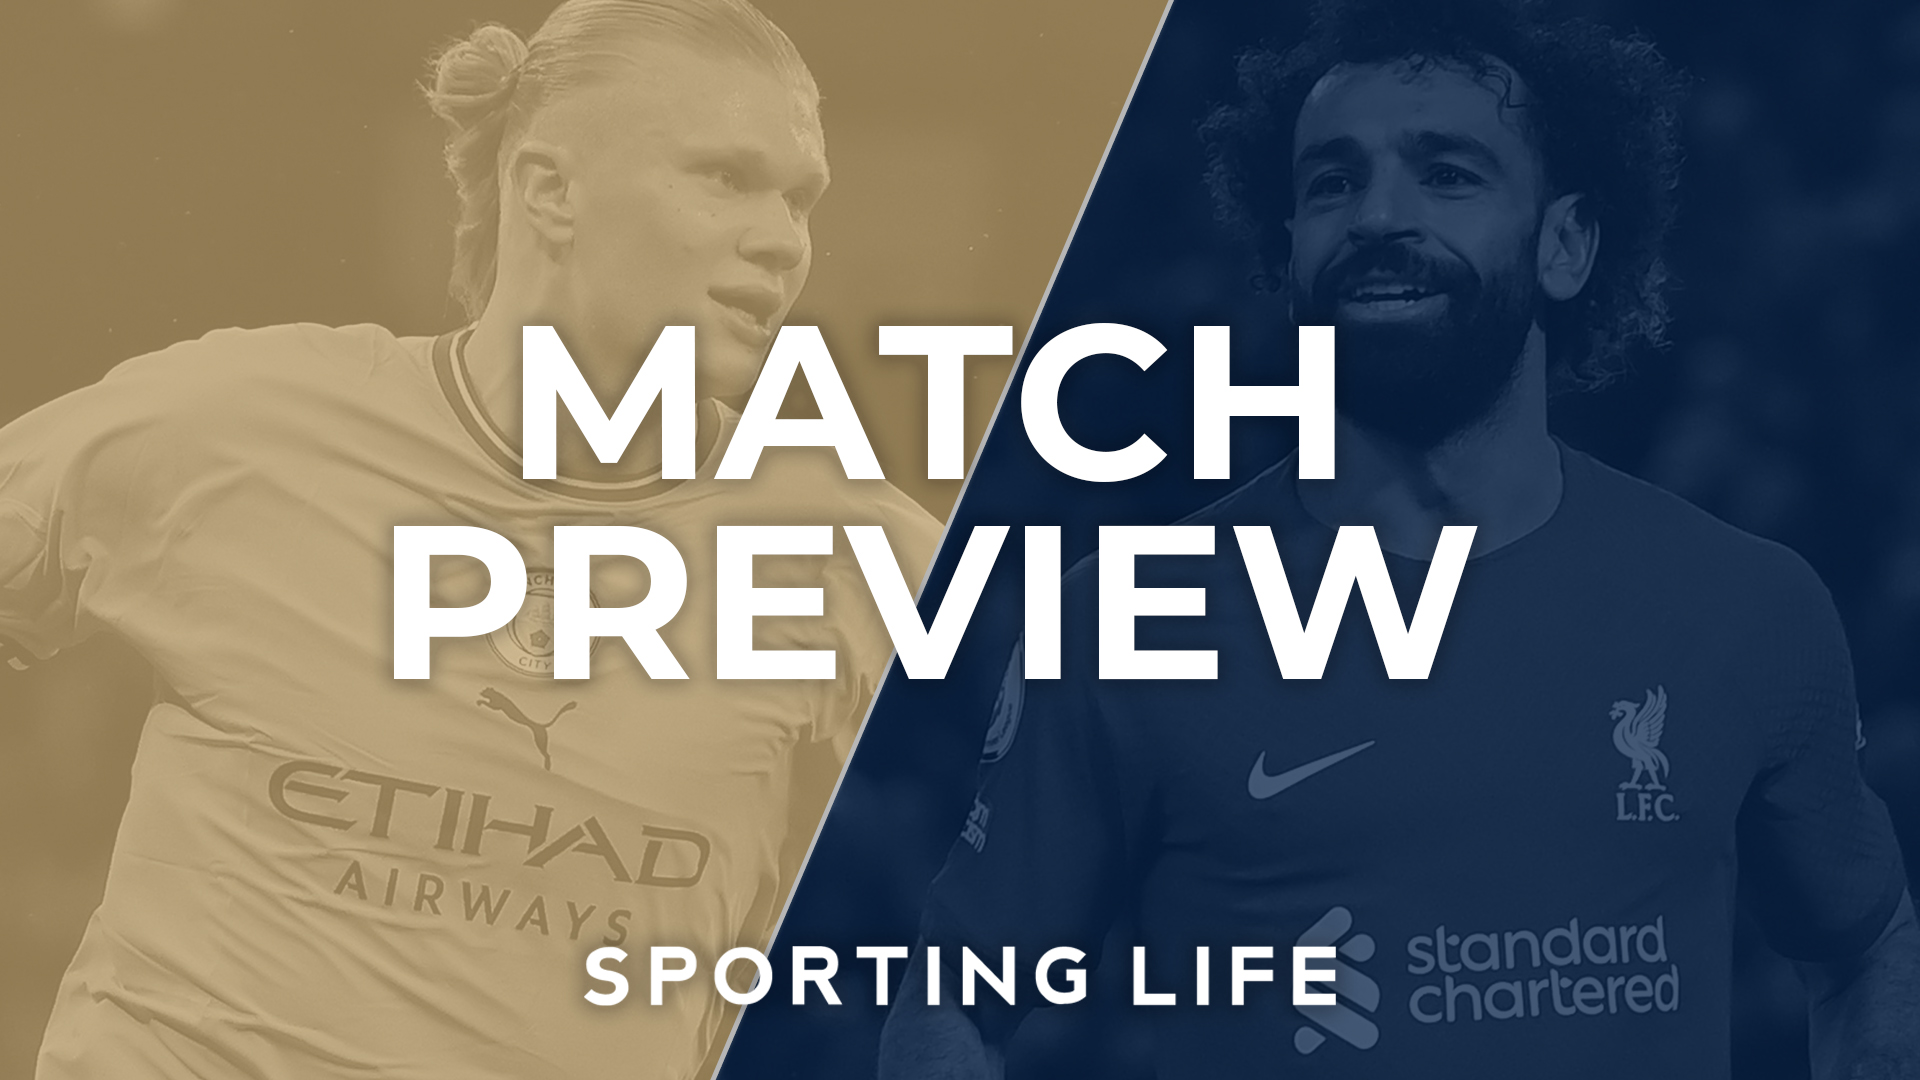 Arsenal vs. Manchester City: Betting Odds, Match Preview and EPL Prediction, News, Scores, Highlights, Stats, and Rumors